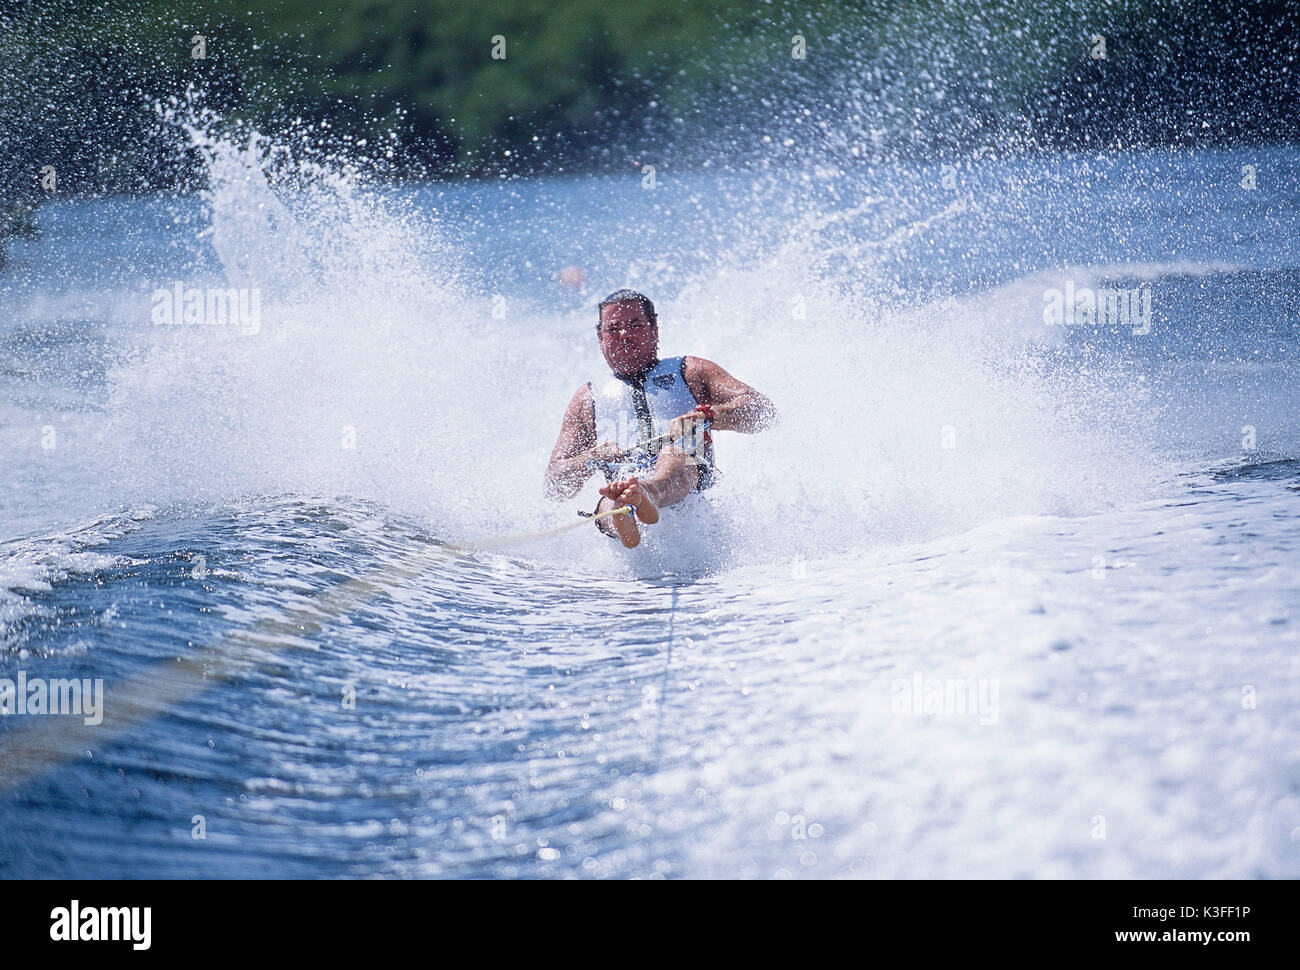 Barefooted water-ski driver Stock Photo